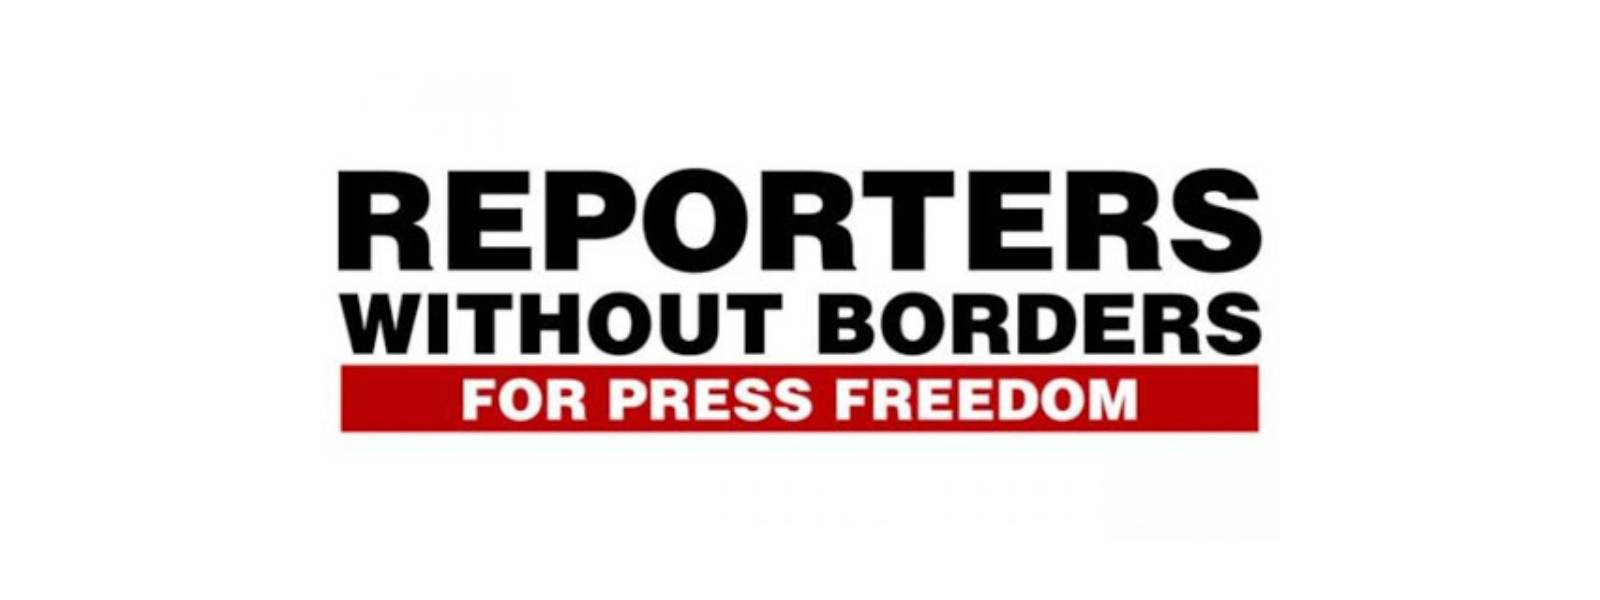 SL slides to 127th position on press freedom index